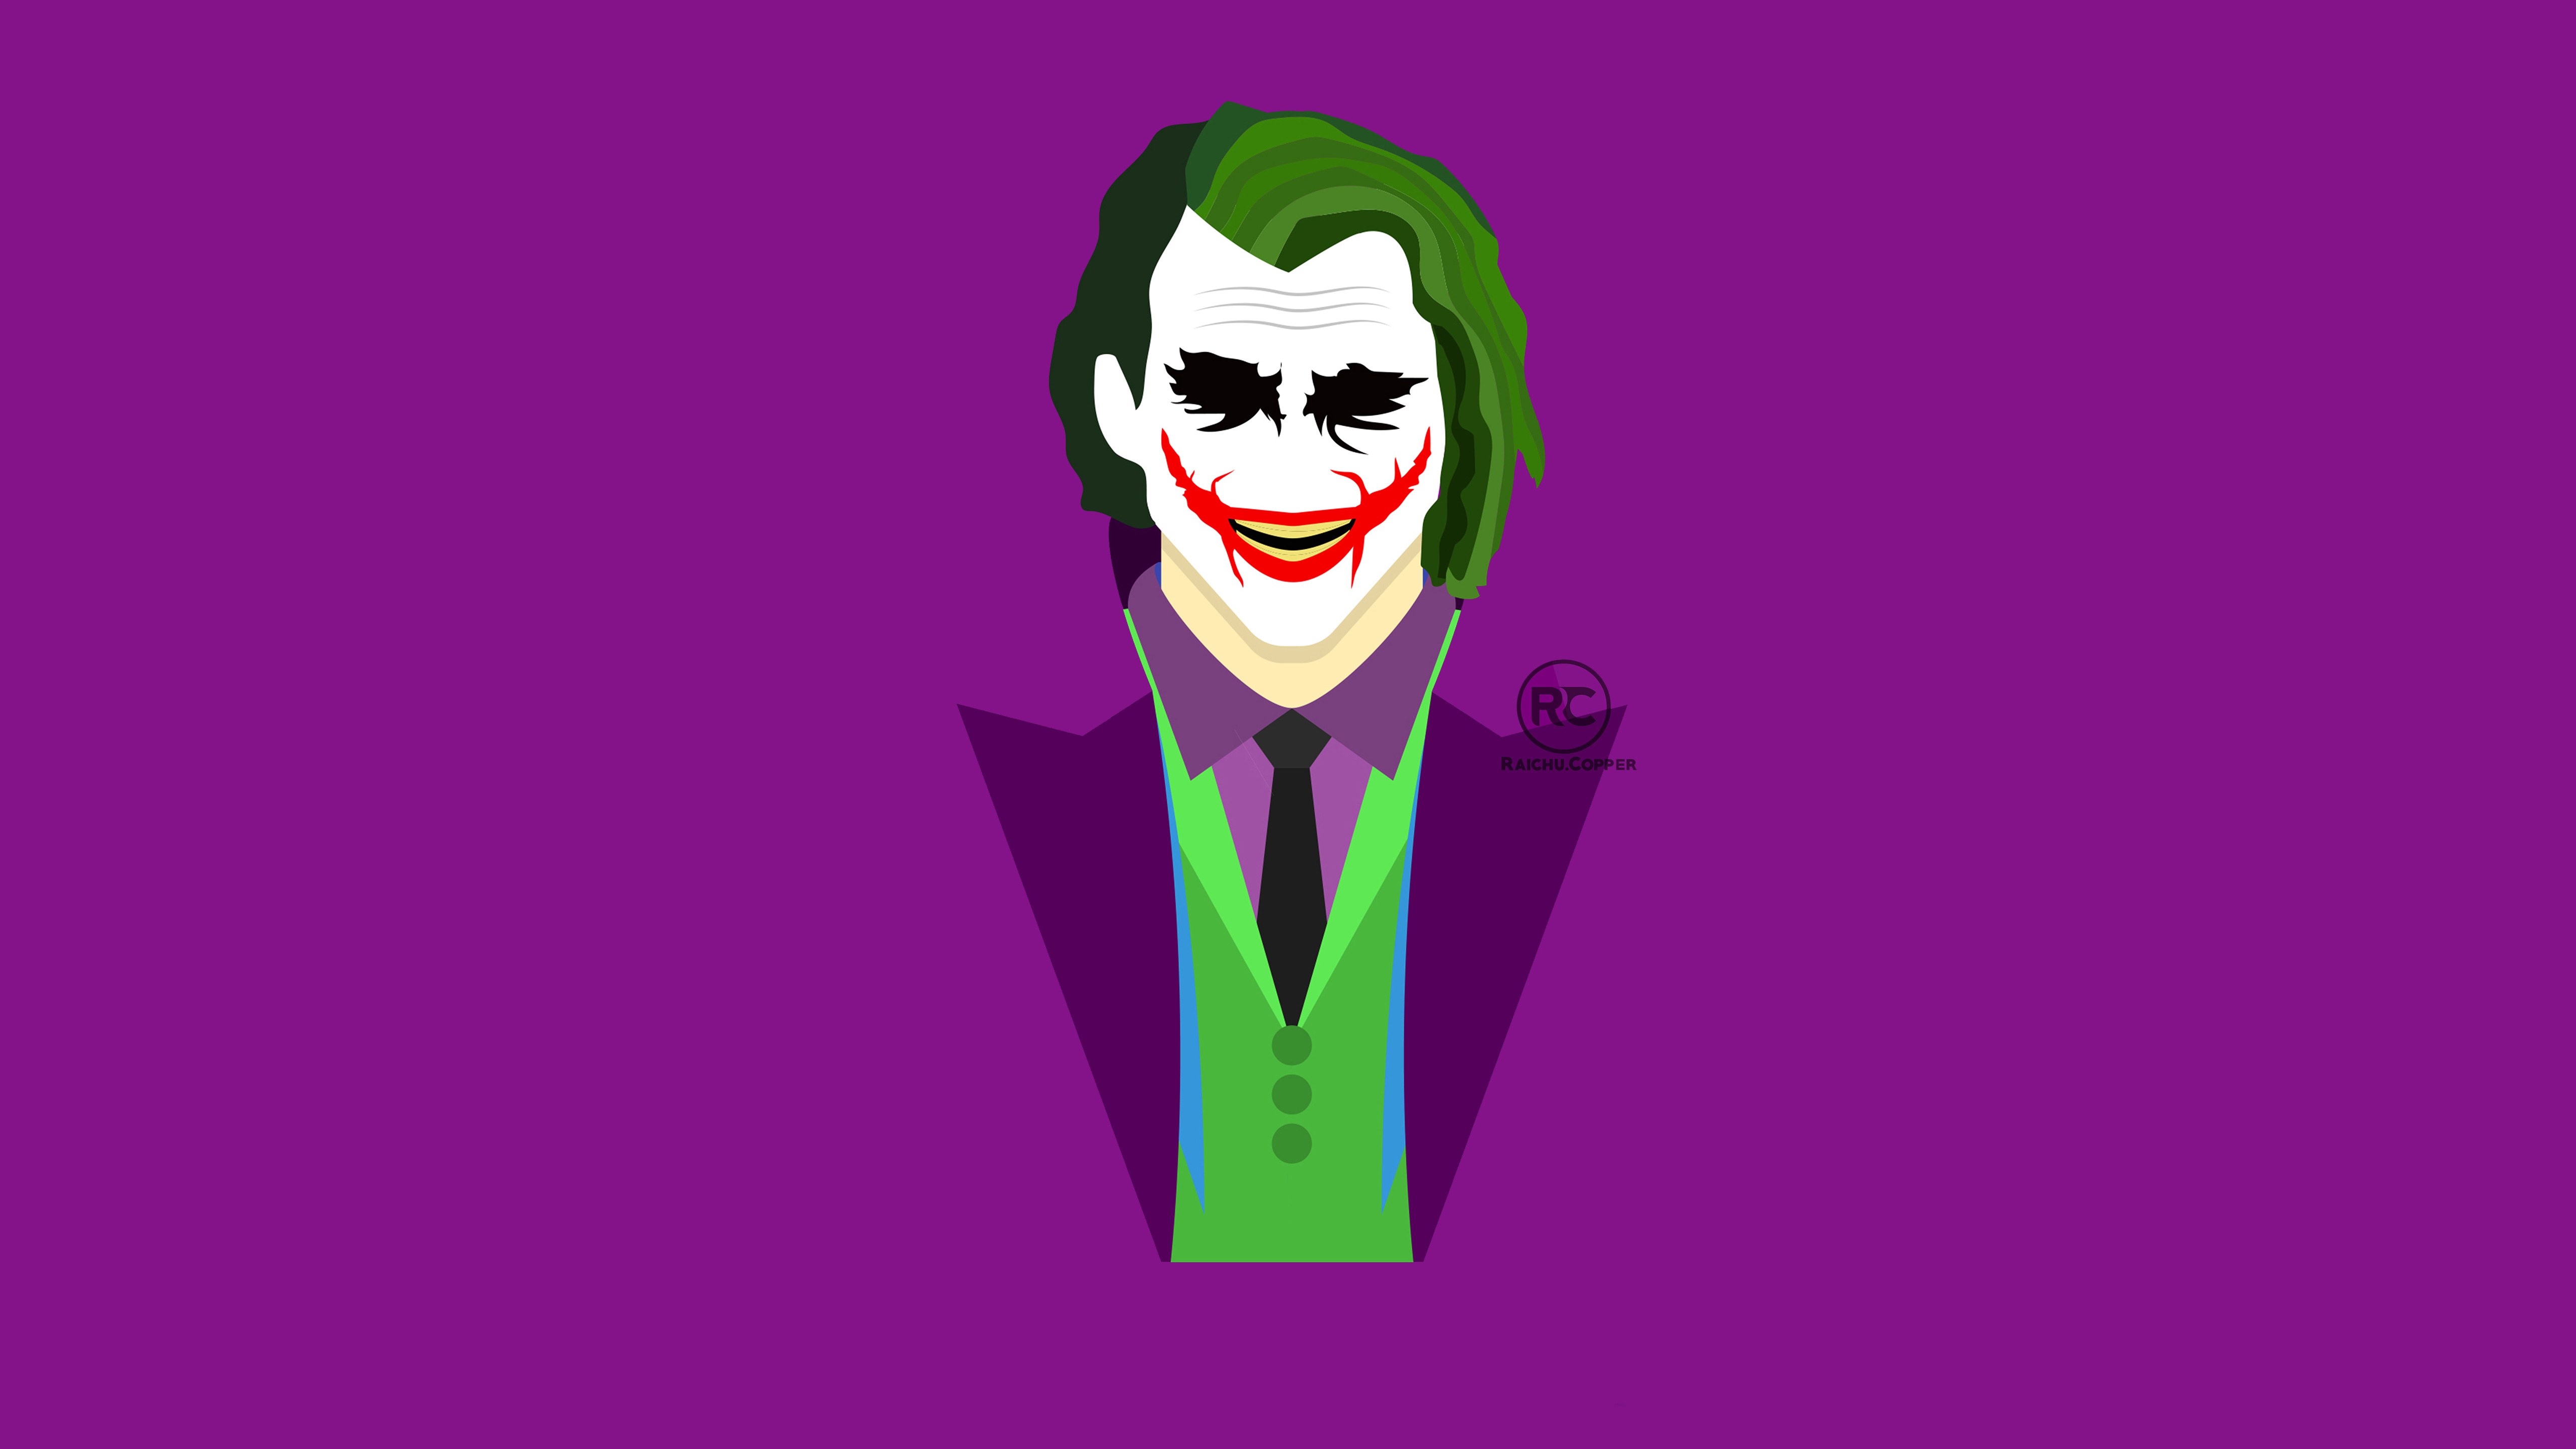 Joker Heath Ledger Artwork, HD Superheroes, 4k Wallpapers, Images,  Backgrounds, Photos and Pictures